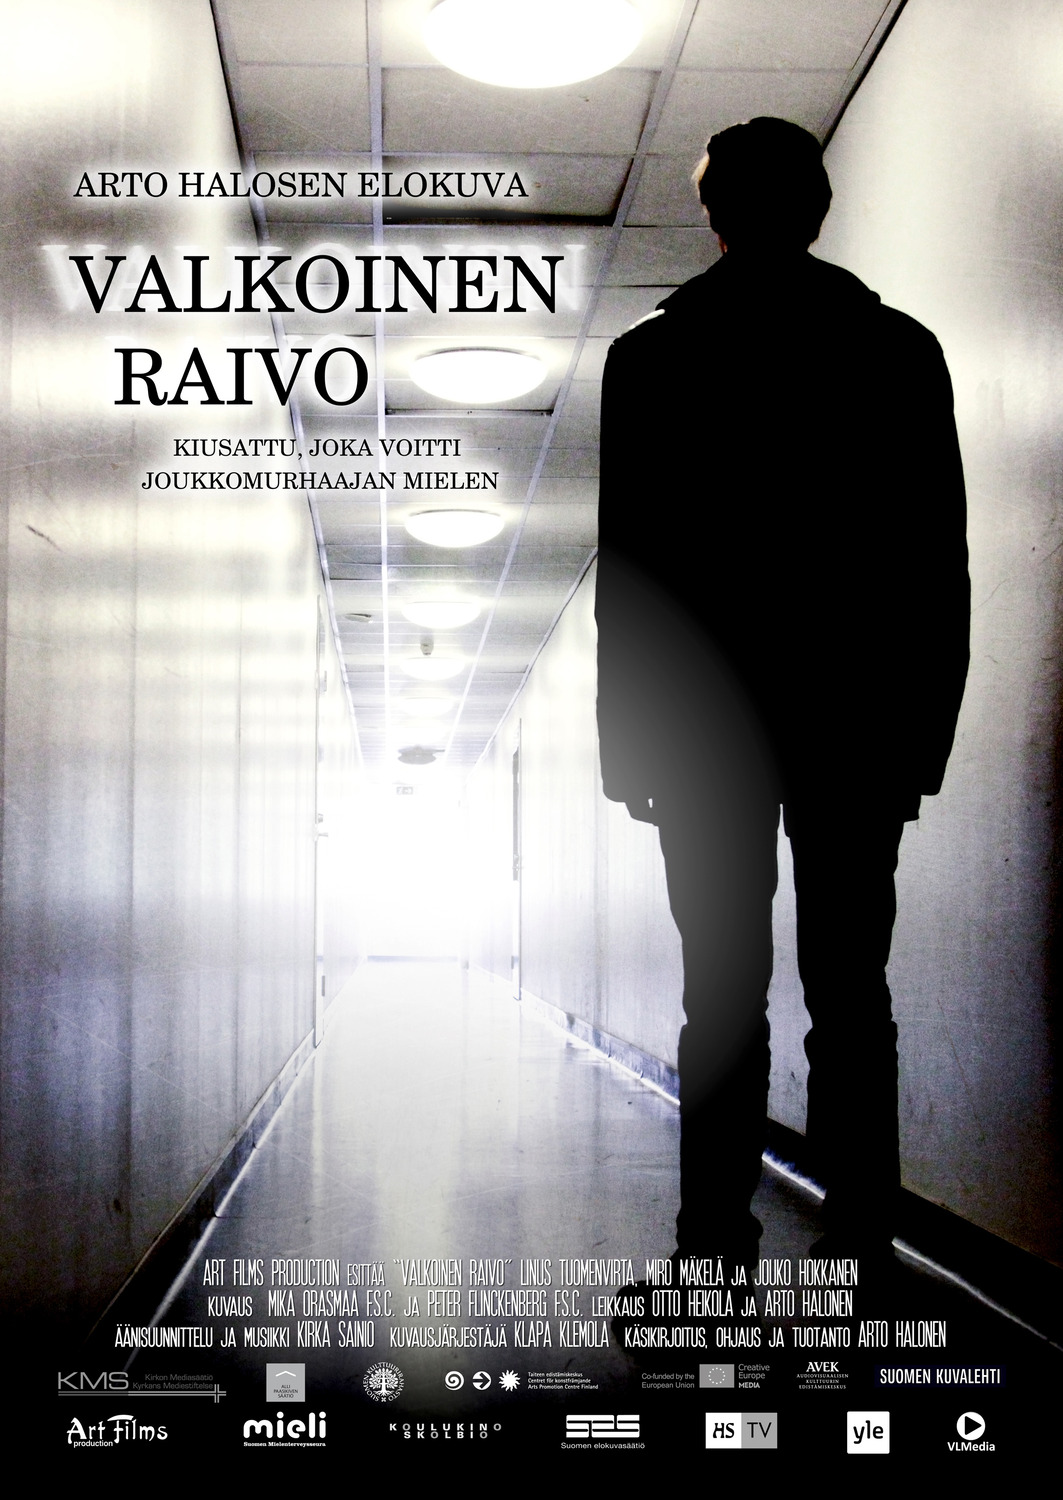 Extra Large Movie Poster Image for Valkoinen raivo 